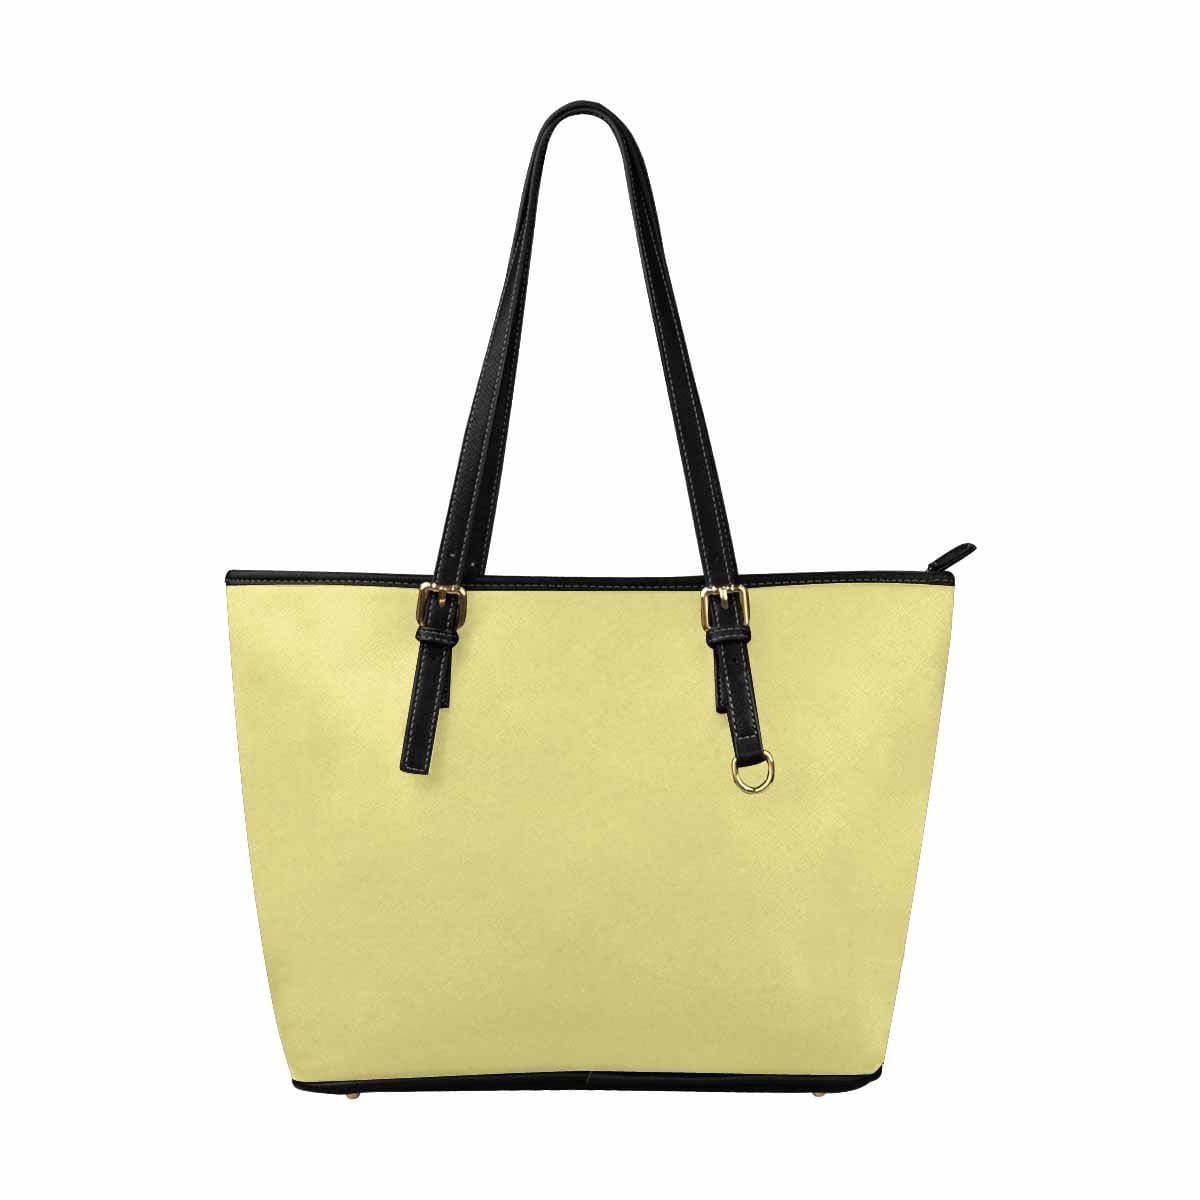 Large Leather Tote Shoulder Bag - Khaki Yellow - Bags | Leather Tote Bags